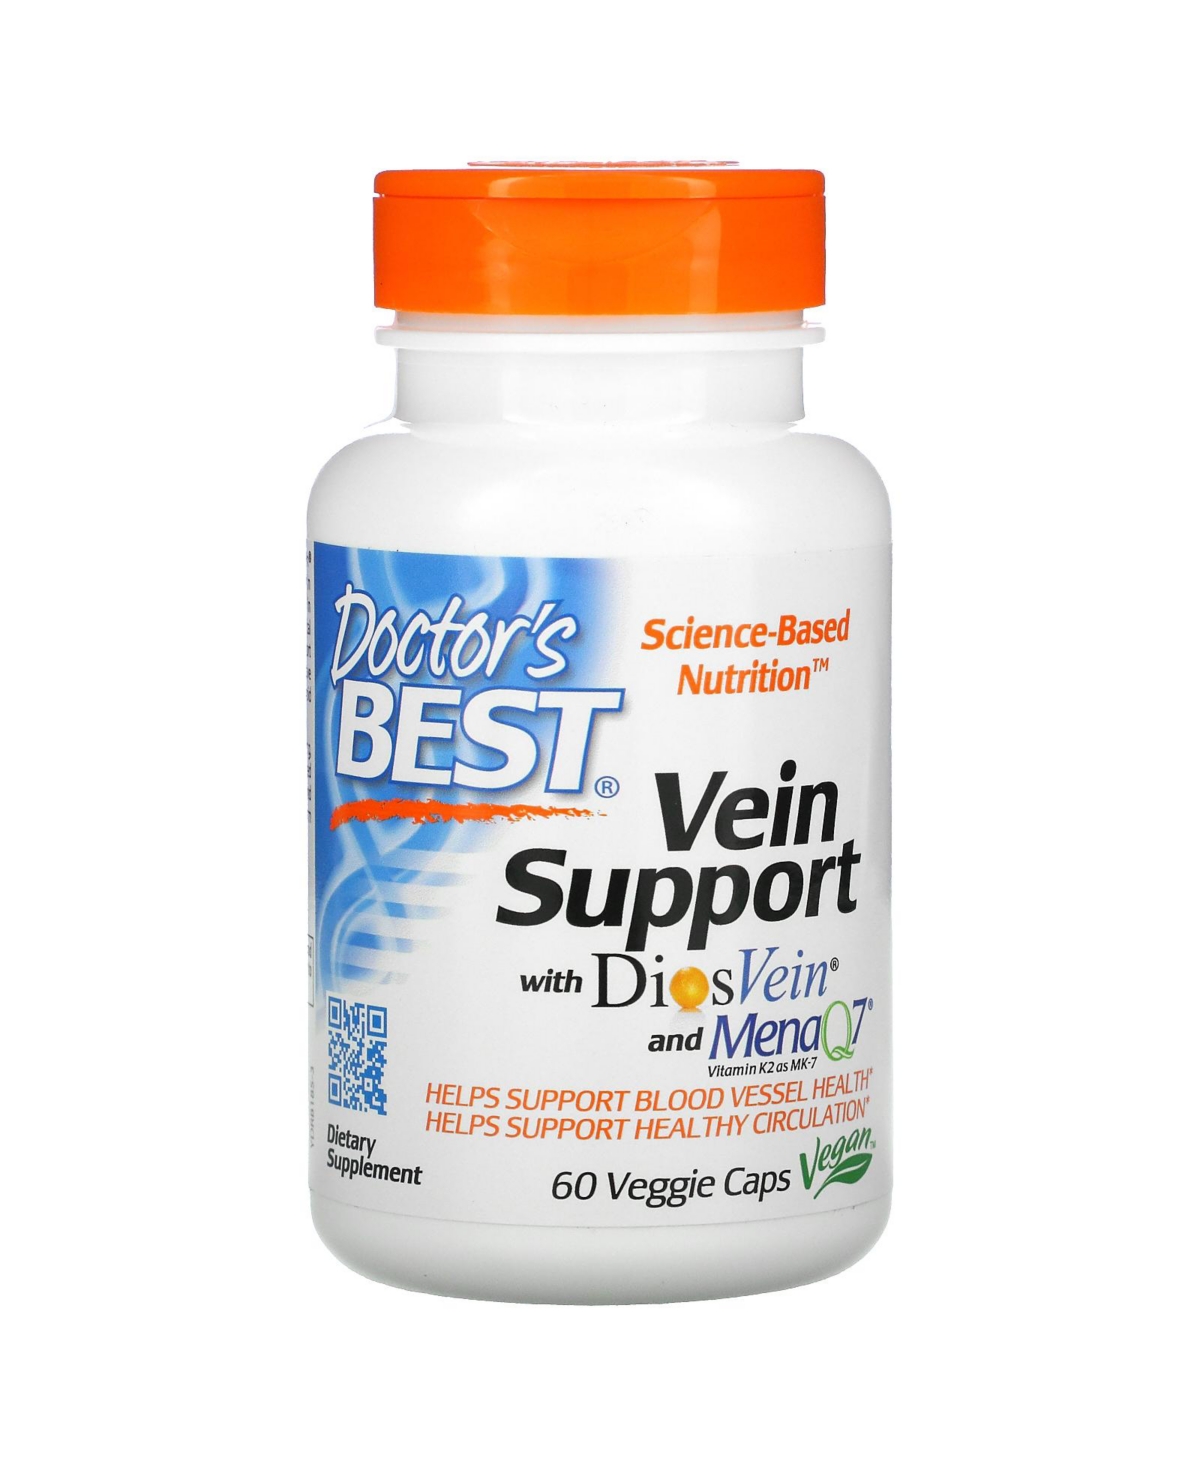 Vein Support with DiosVein and MenaQ7 - 60 Veggie Caps - Assorted Pre-pack (See Table